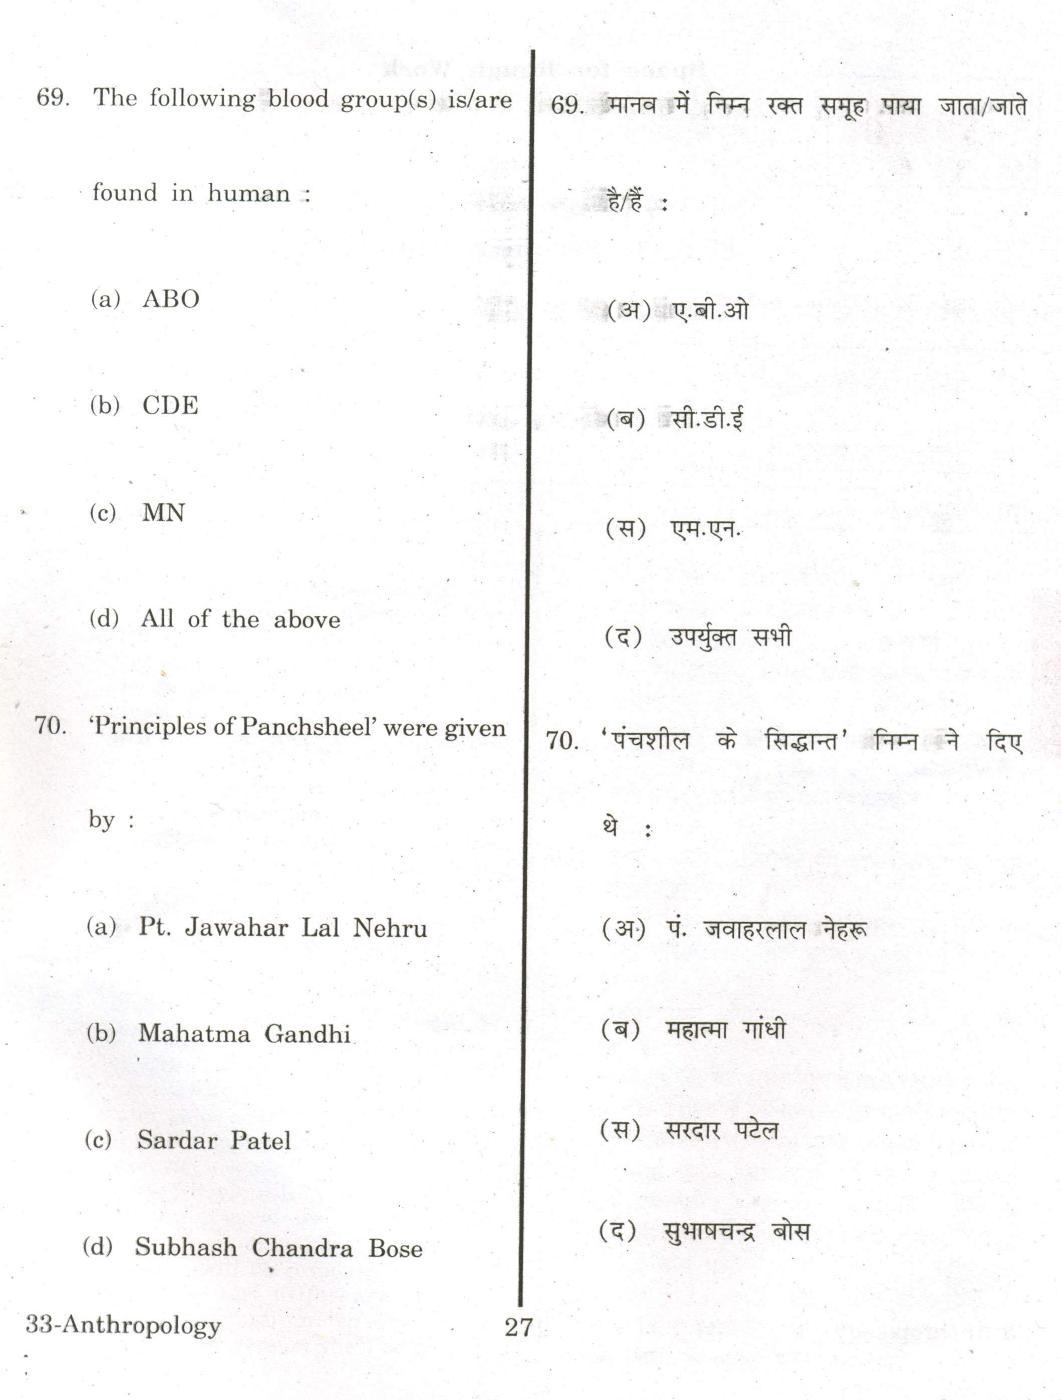 URATPG Anthropology 2013 Question Paper - Page 26